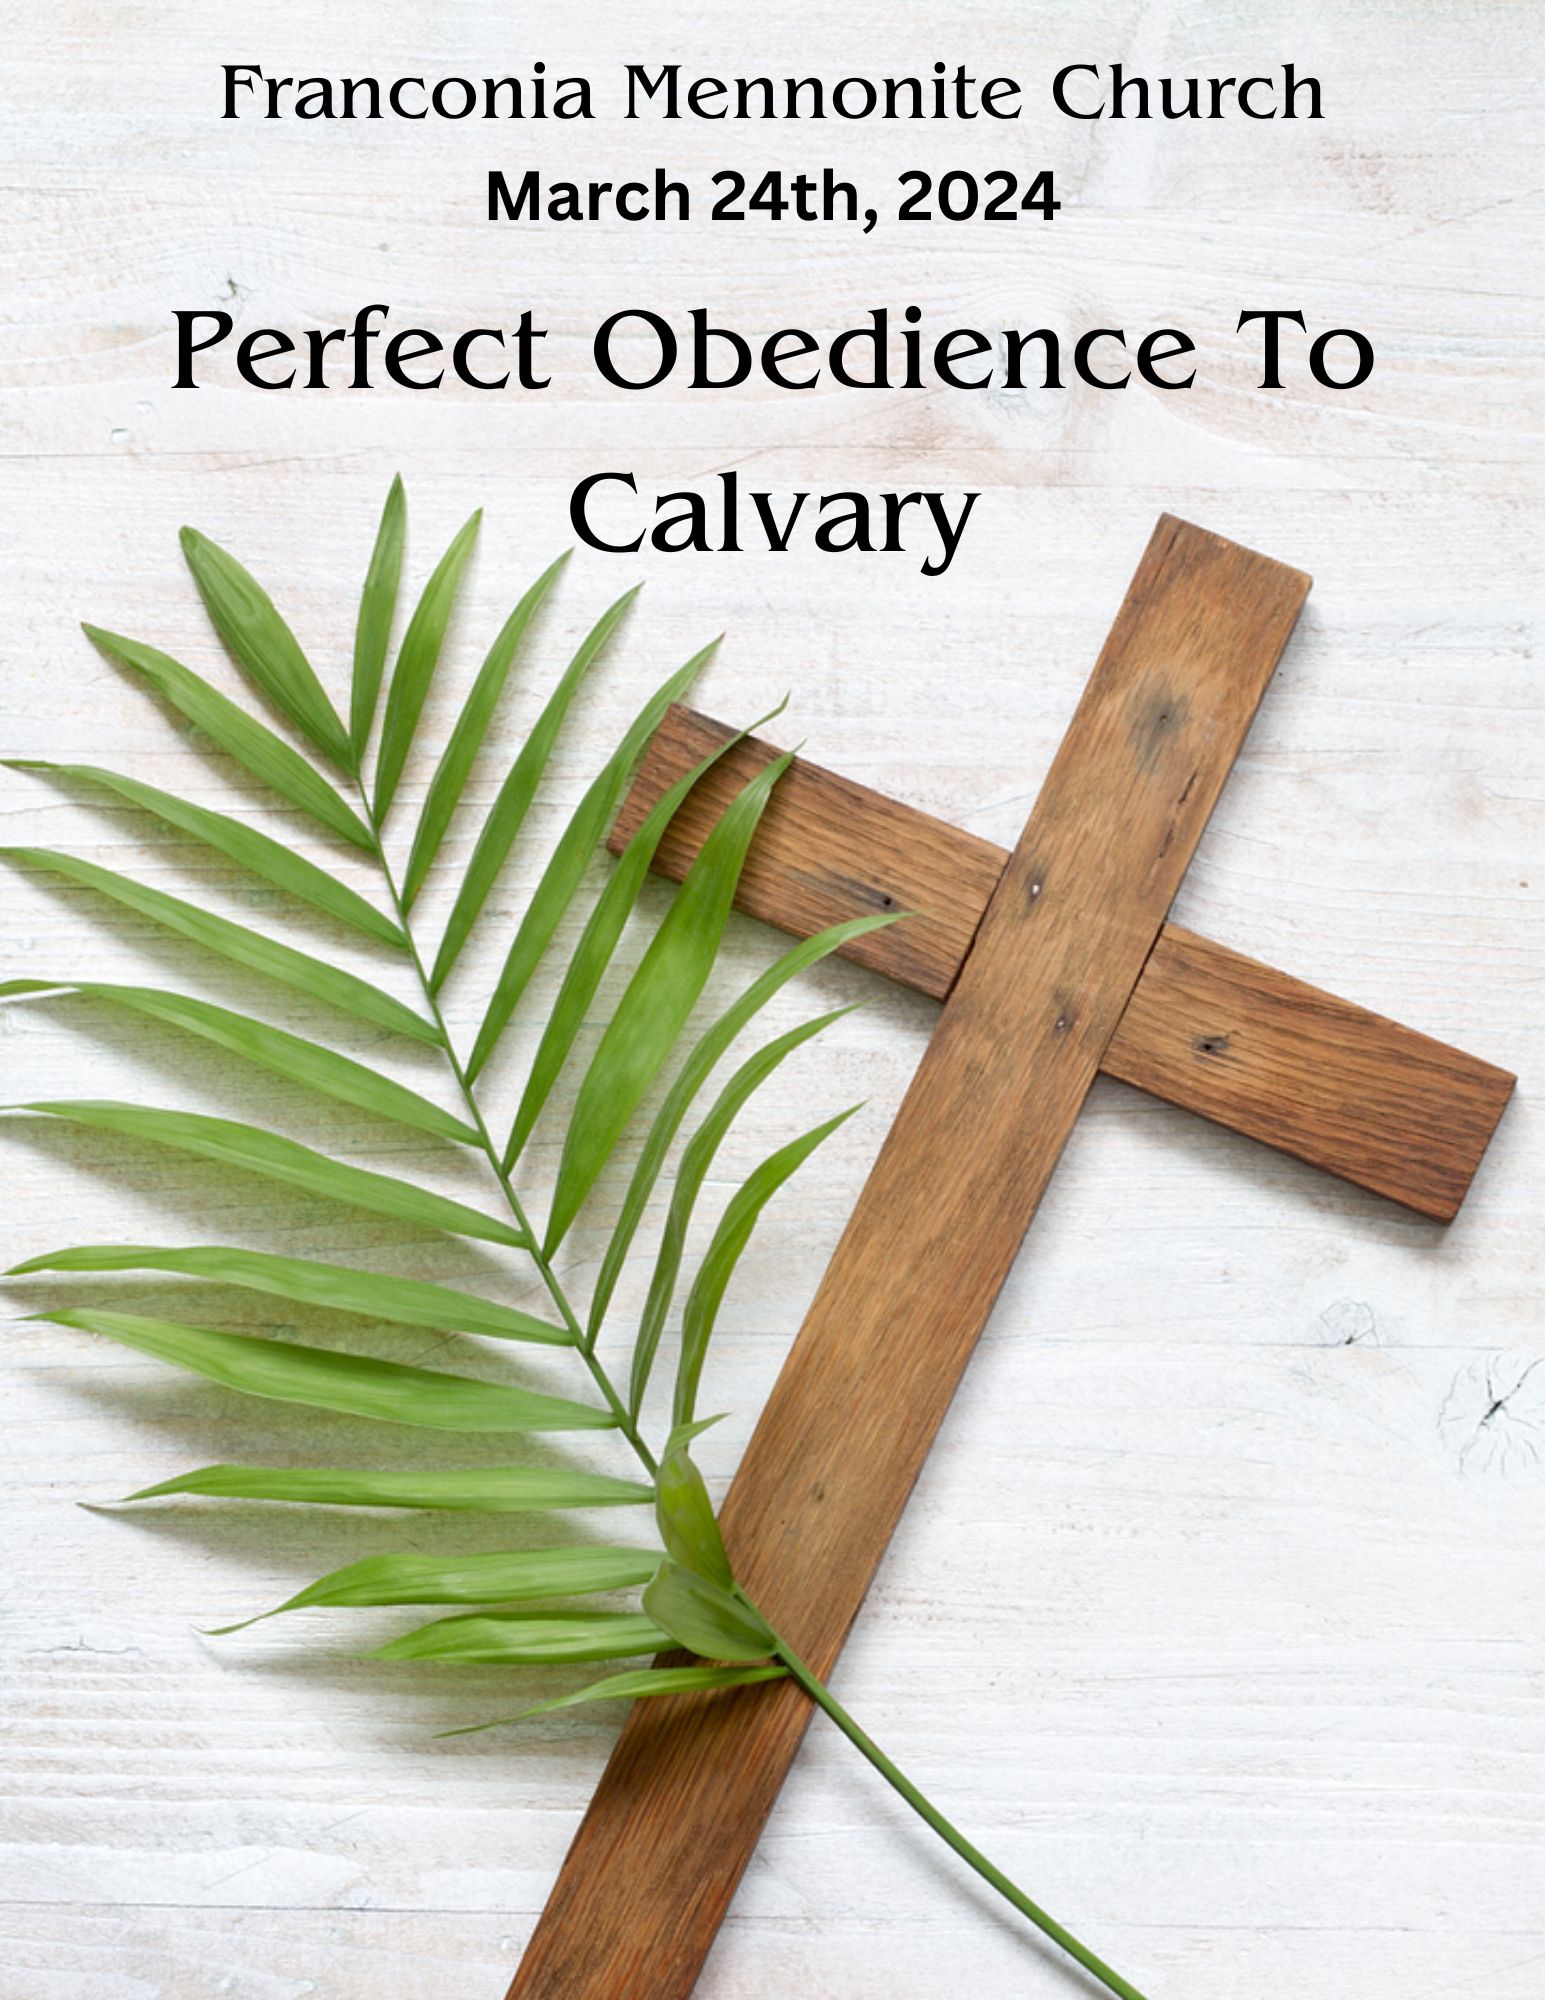 Perfect Obedience To Calvary